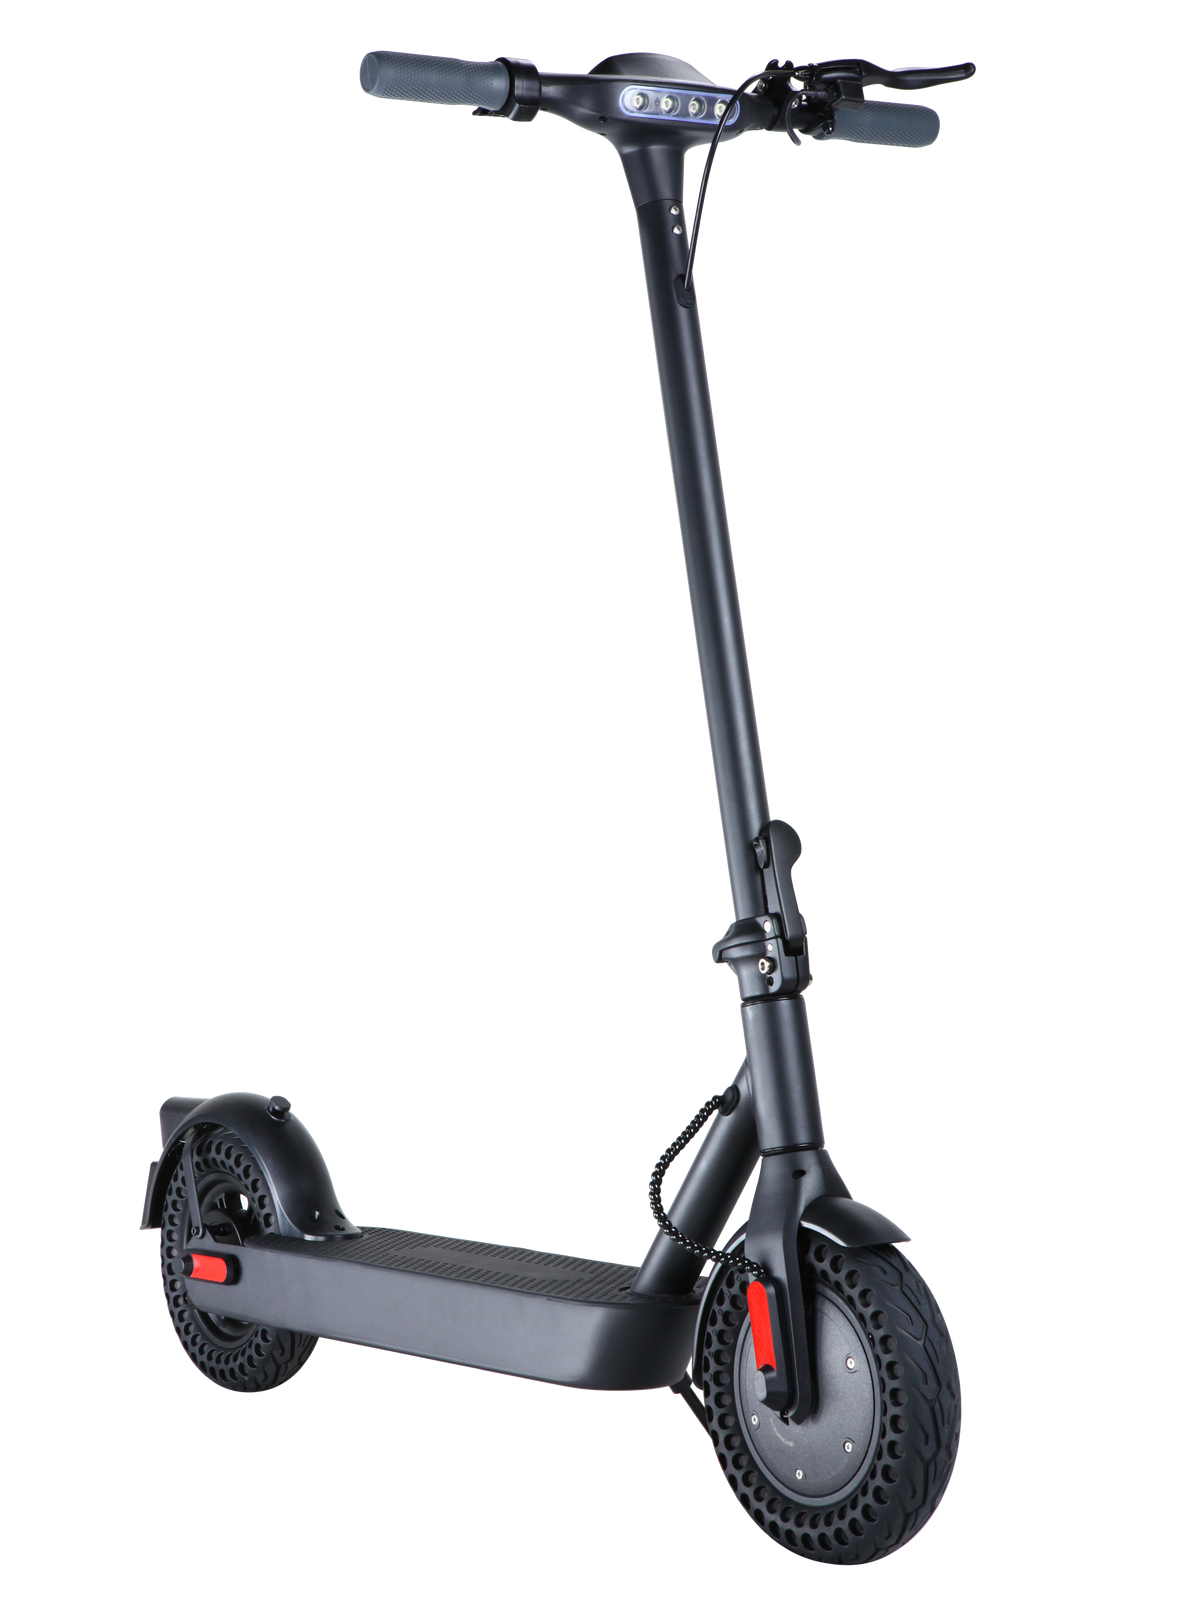 Best deals on Electric Scooter in Edmonton Alberta Canada. Scooters from 250W, 350W, 500W, 500W Dual Motor, 800W, 800W Dual, 1000W, & 1200W Dual Motor. High-performance Electric Scooter with long-term durability. Street Legal No License Required. Best Travel & Sports Electric Scooter. Youth to Adult Age Recommendation.